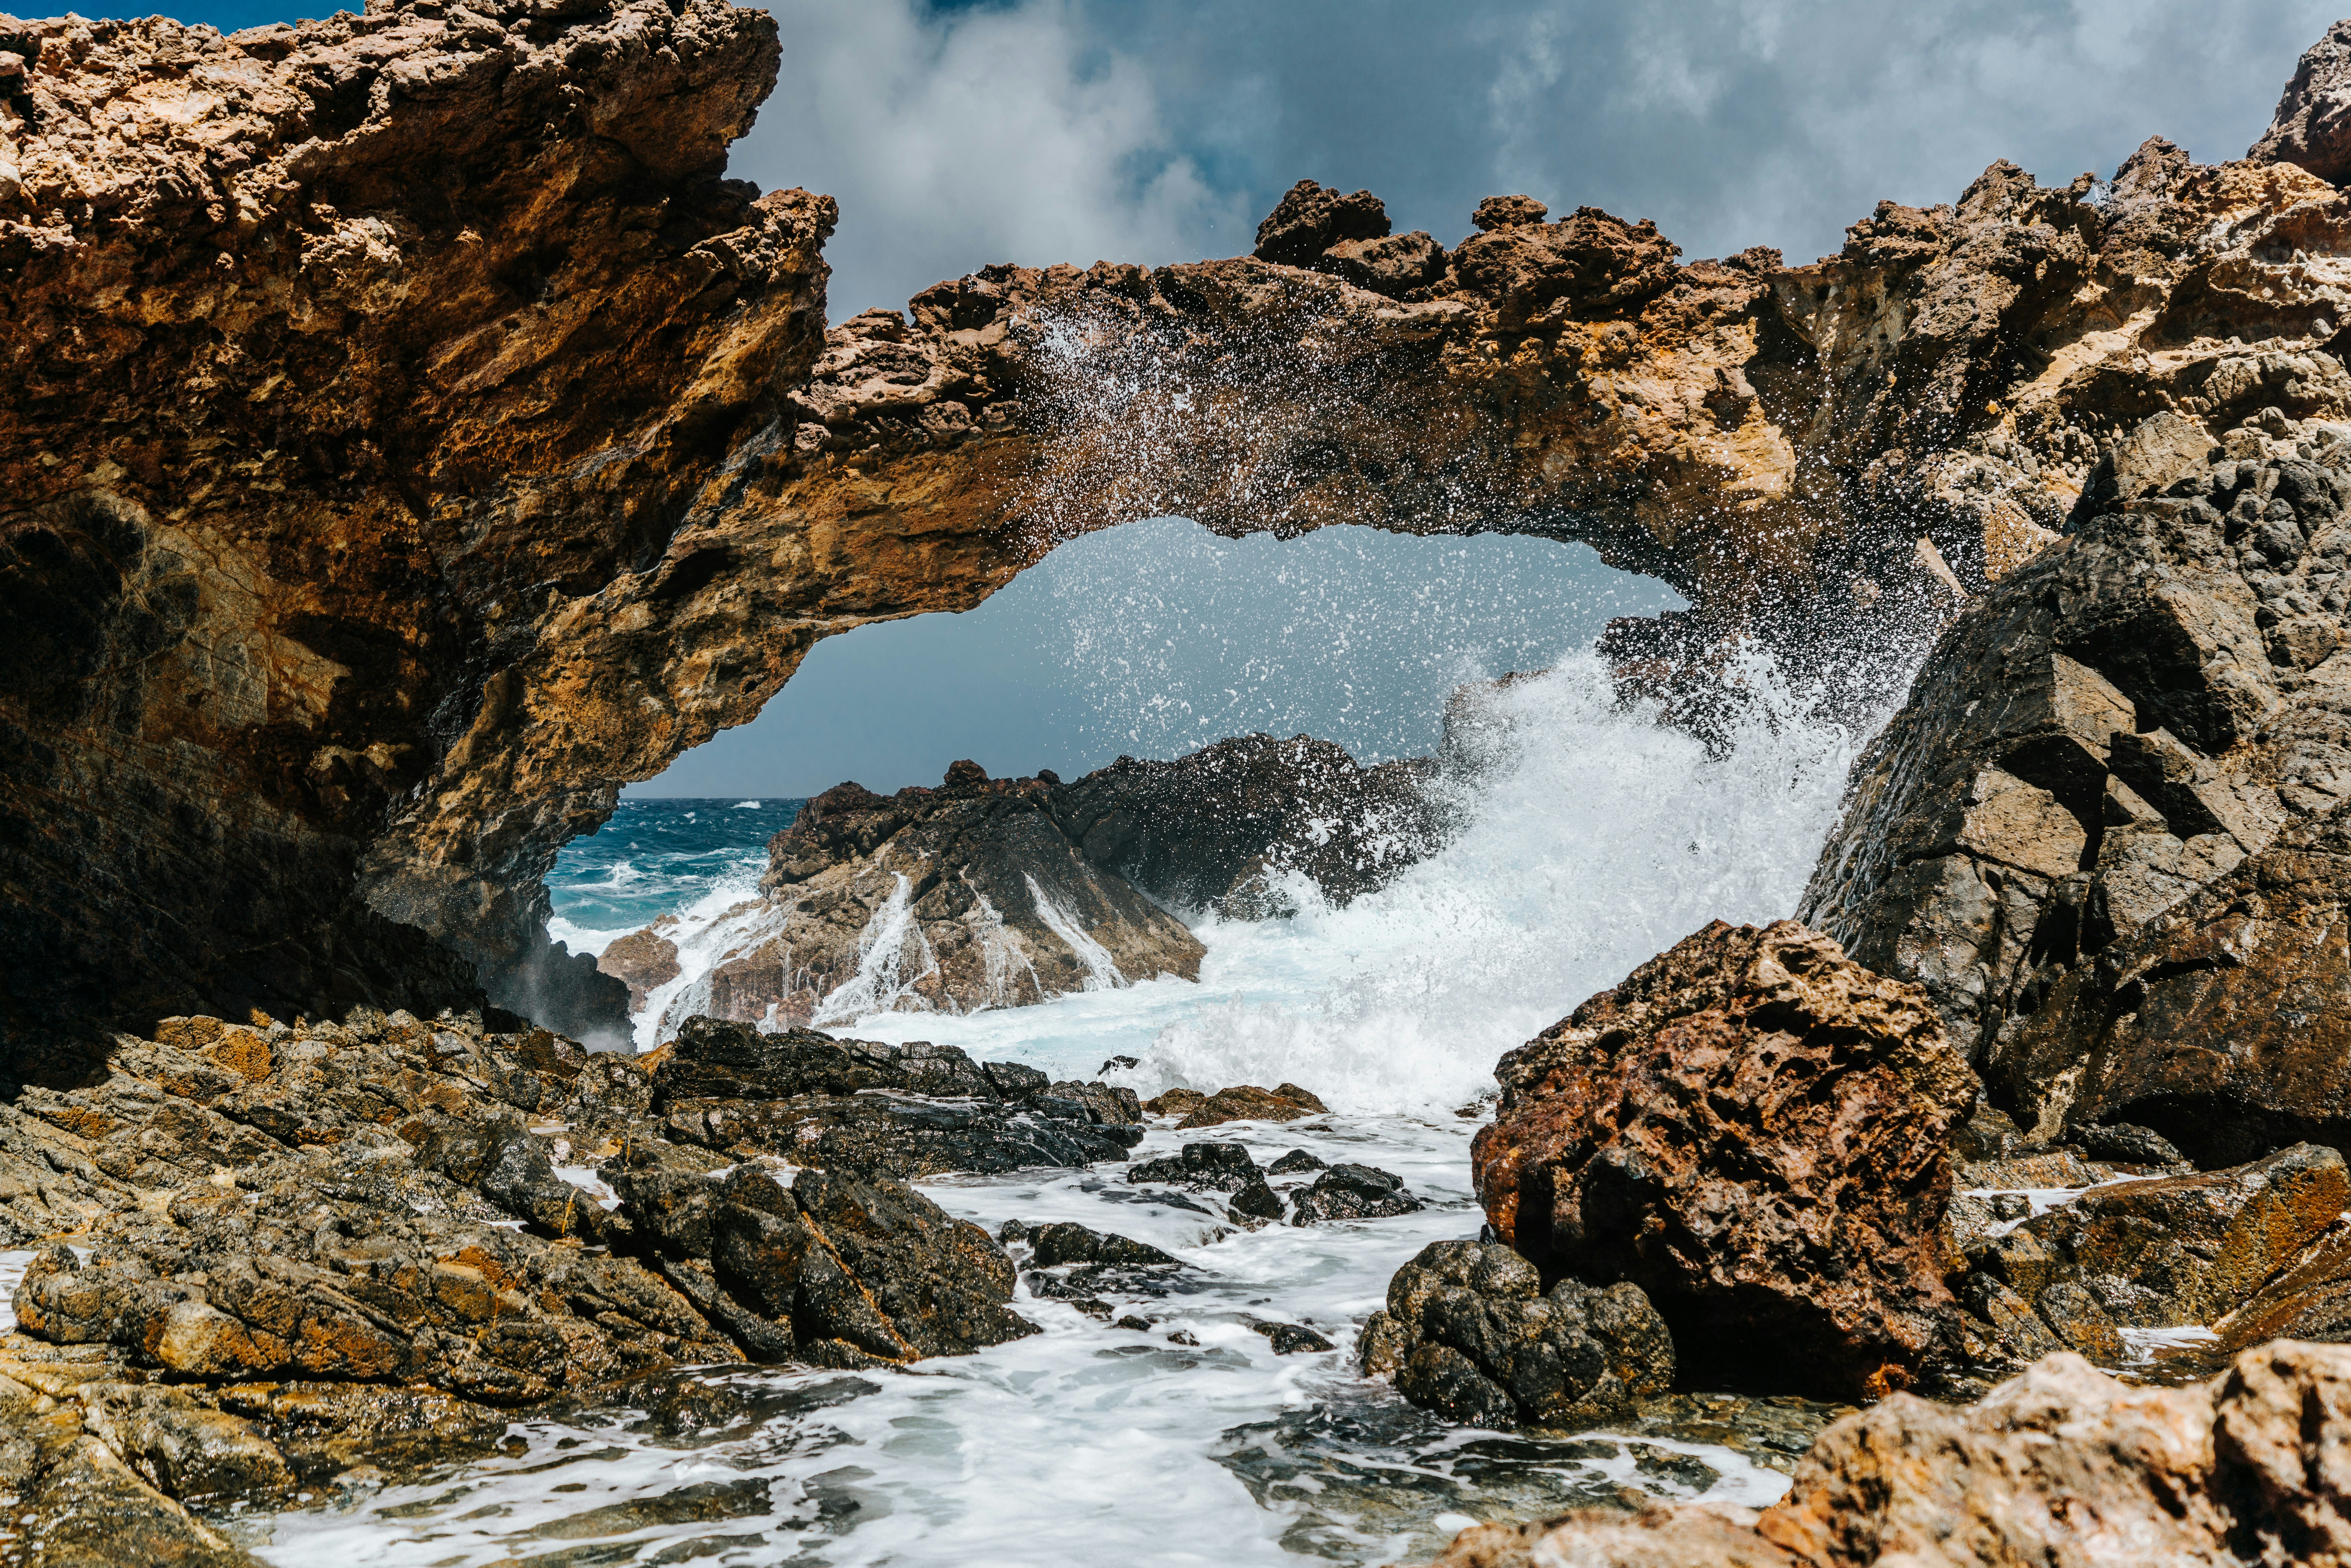 Check out these official travel advisories with the best information on Aruba's safety level. 
pictured: the rock formations and crashing waves of Aruba's ocean 